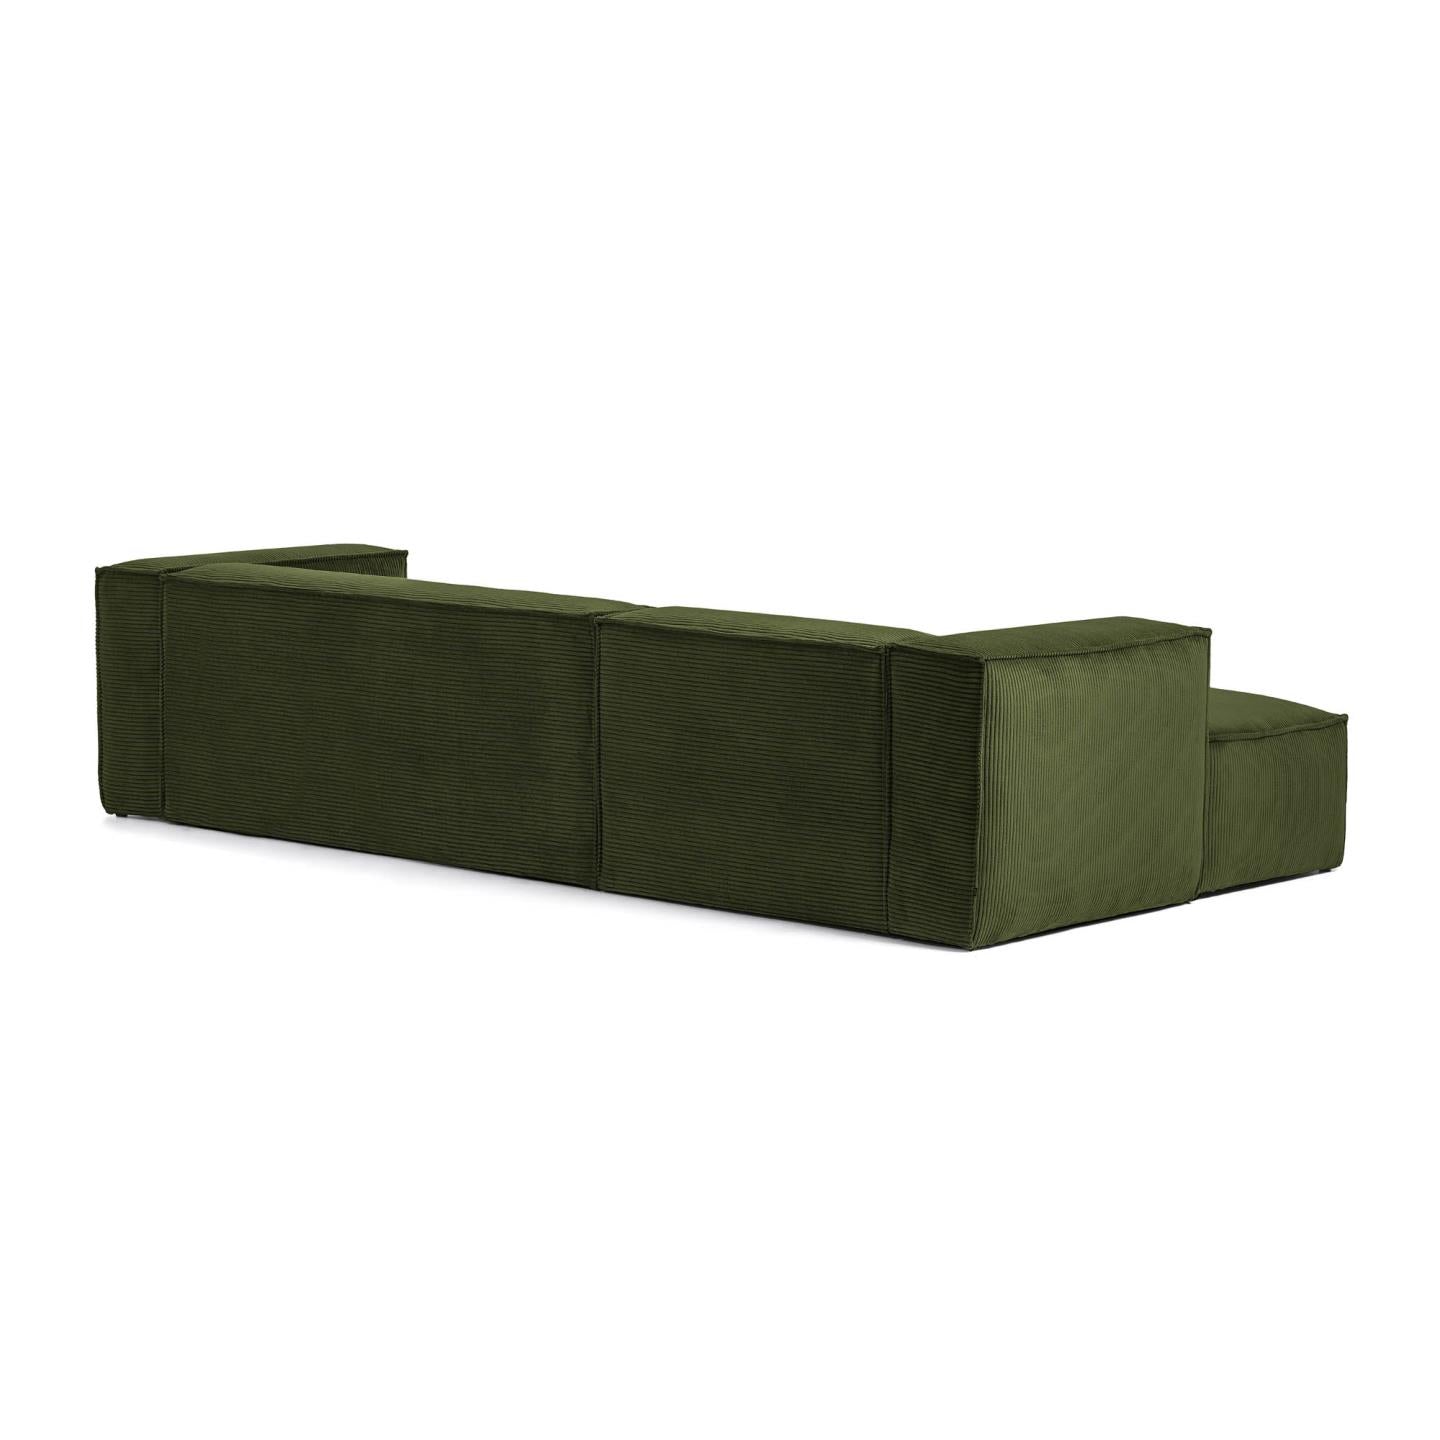 Blok 3 seater sofa with left side chaise longue in green wide seam corduroy, 300 cm